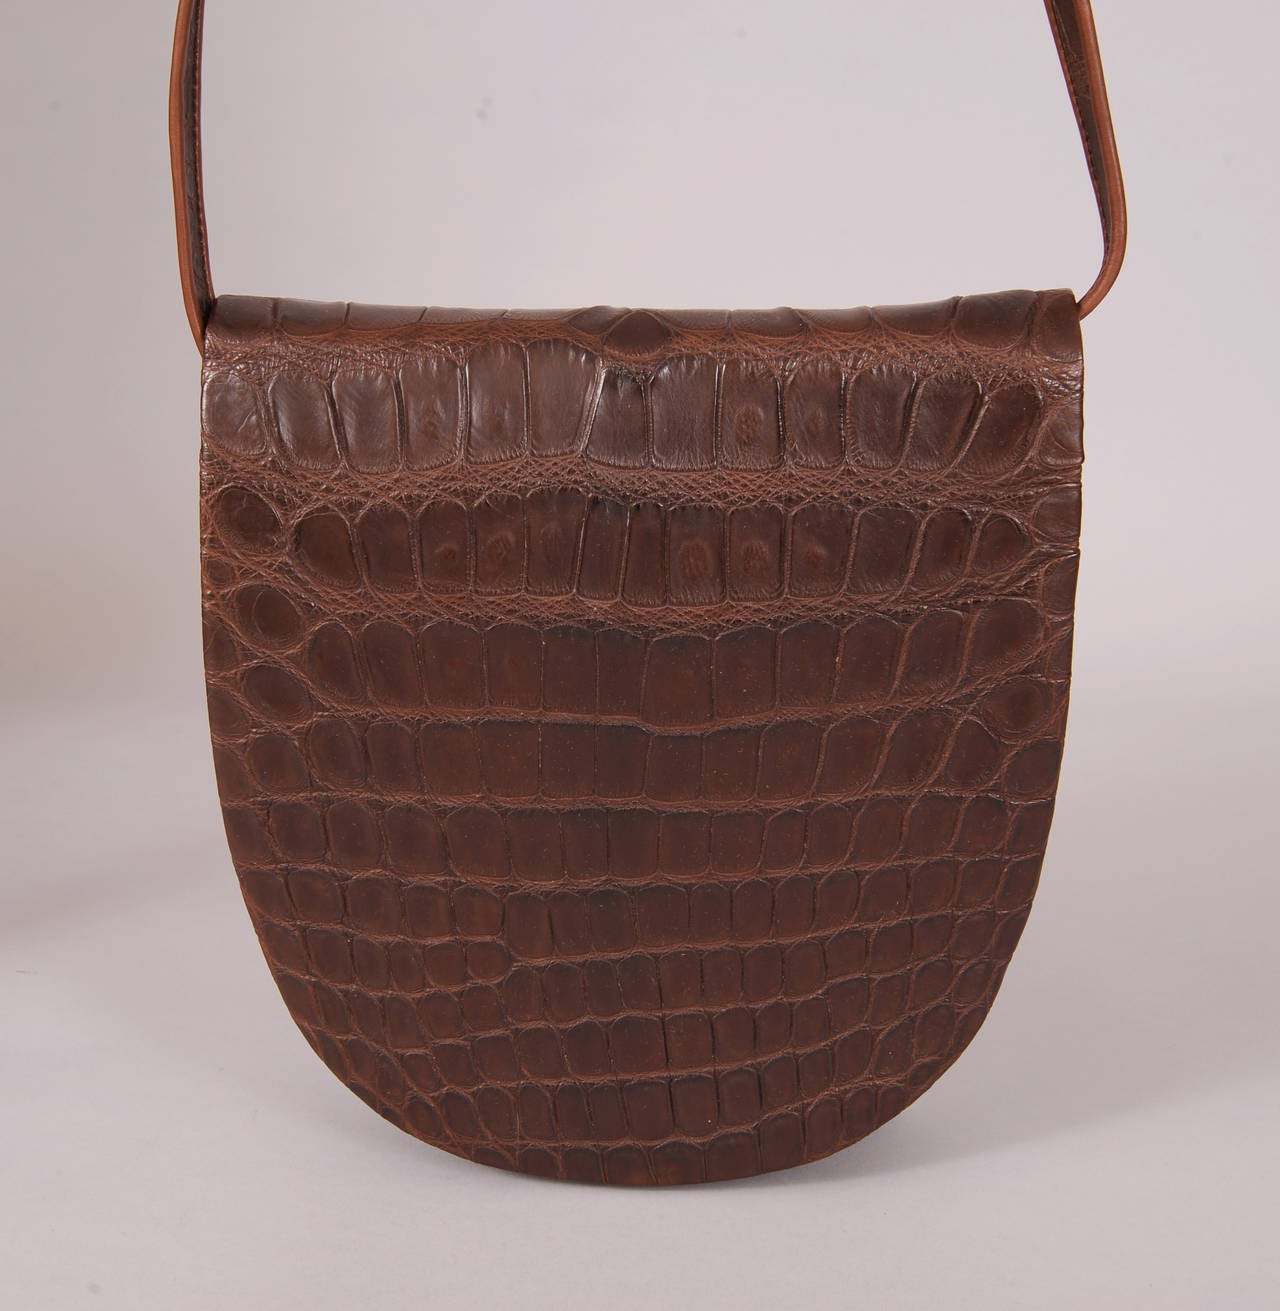 The exterior is matte brown crocodile, the interior flap and sides are buttery soft brown leather, and the interior of the bag is pristine beige suede. The slip pocket retains the original paper wrapped mirror, This bag is in excellent condition and